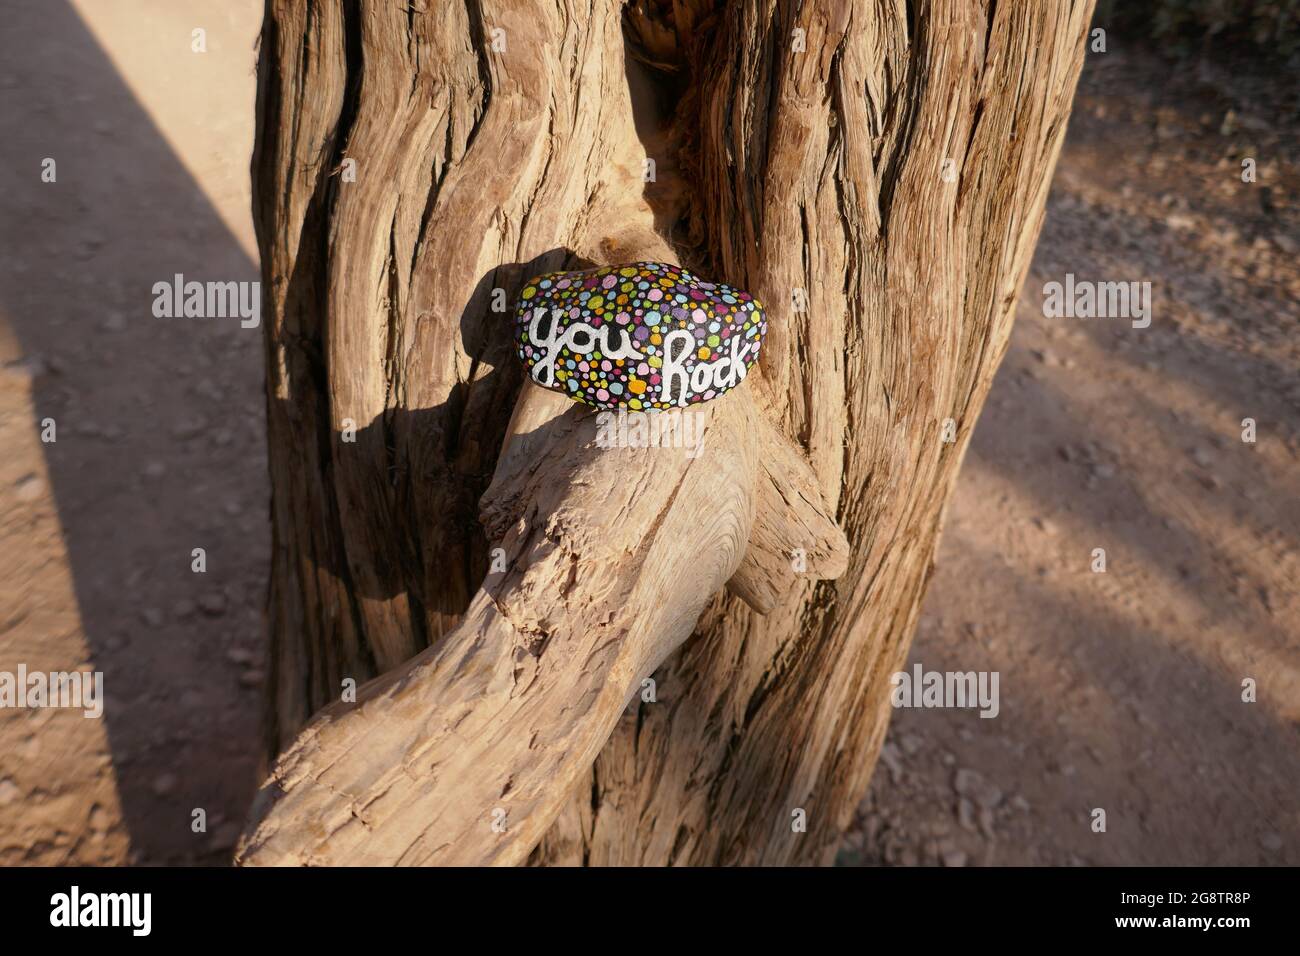 Dead tree in arid climate with you rock kindness rock Stock Photo